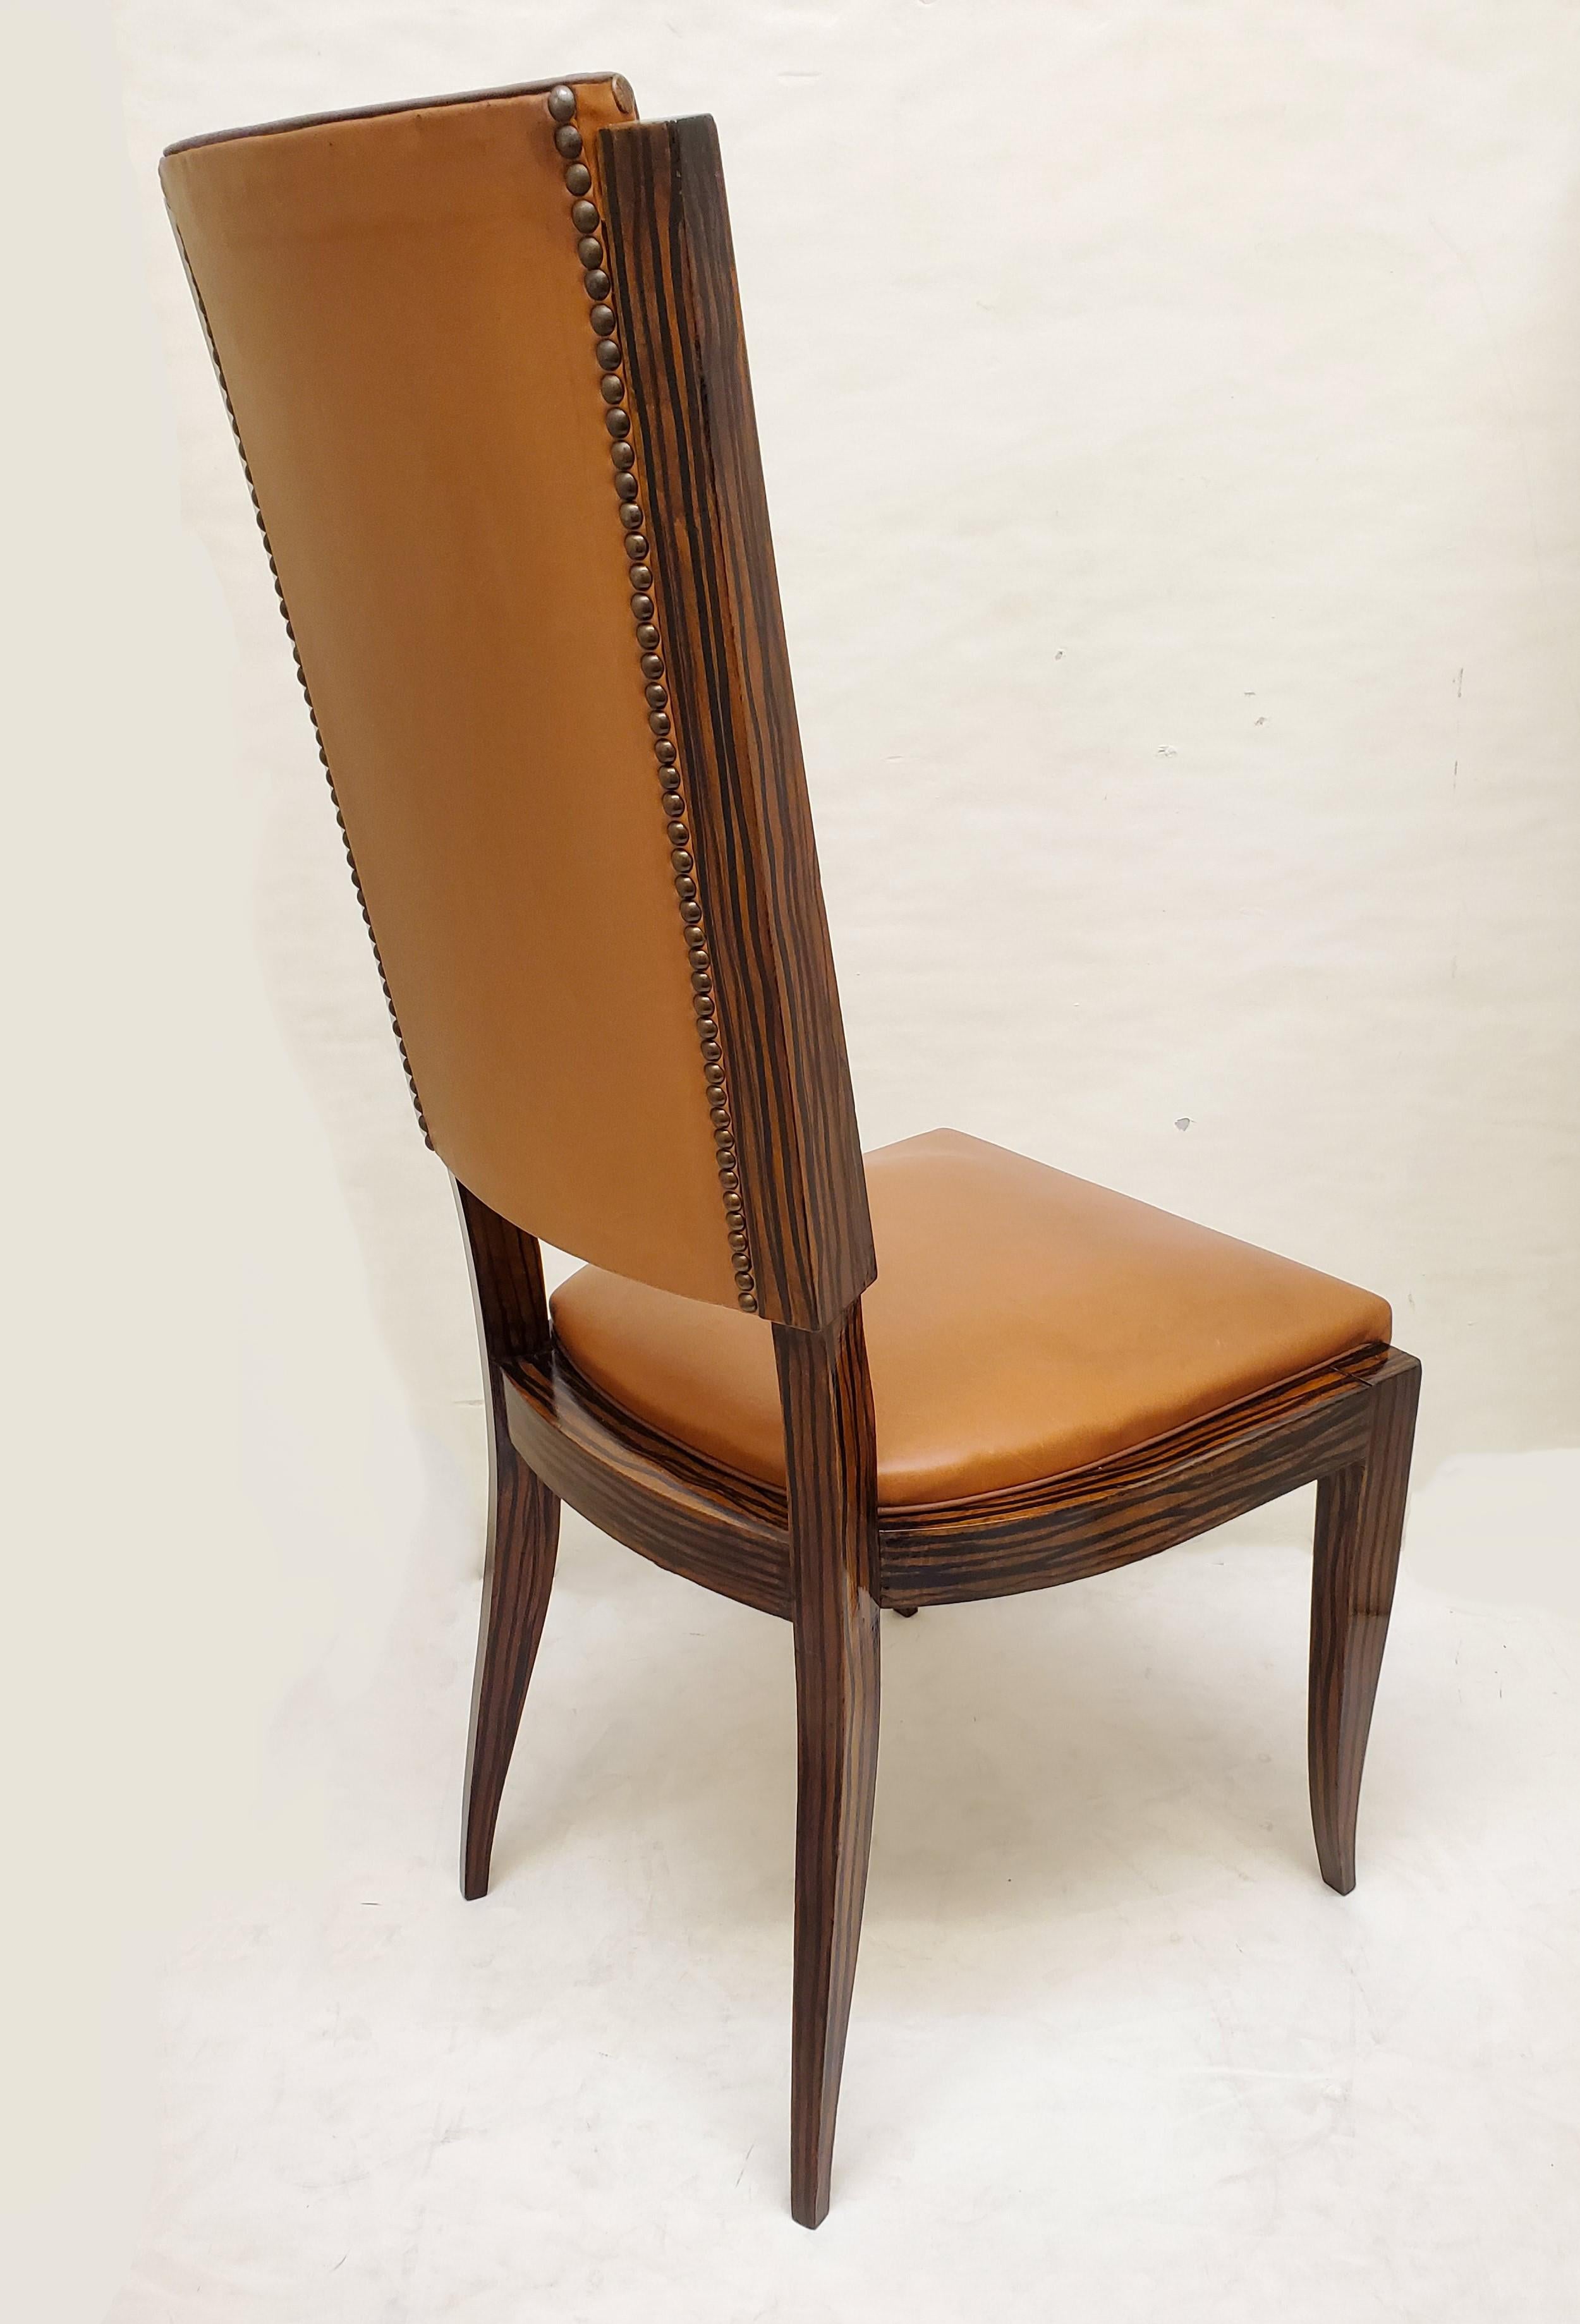 Set of Six Original French Art Deco Faux Macassar Ebony Wood Dining Chairs In Good Condition For Sale In New York City, NY